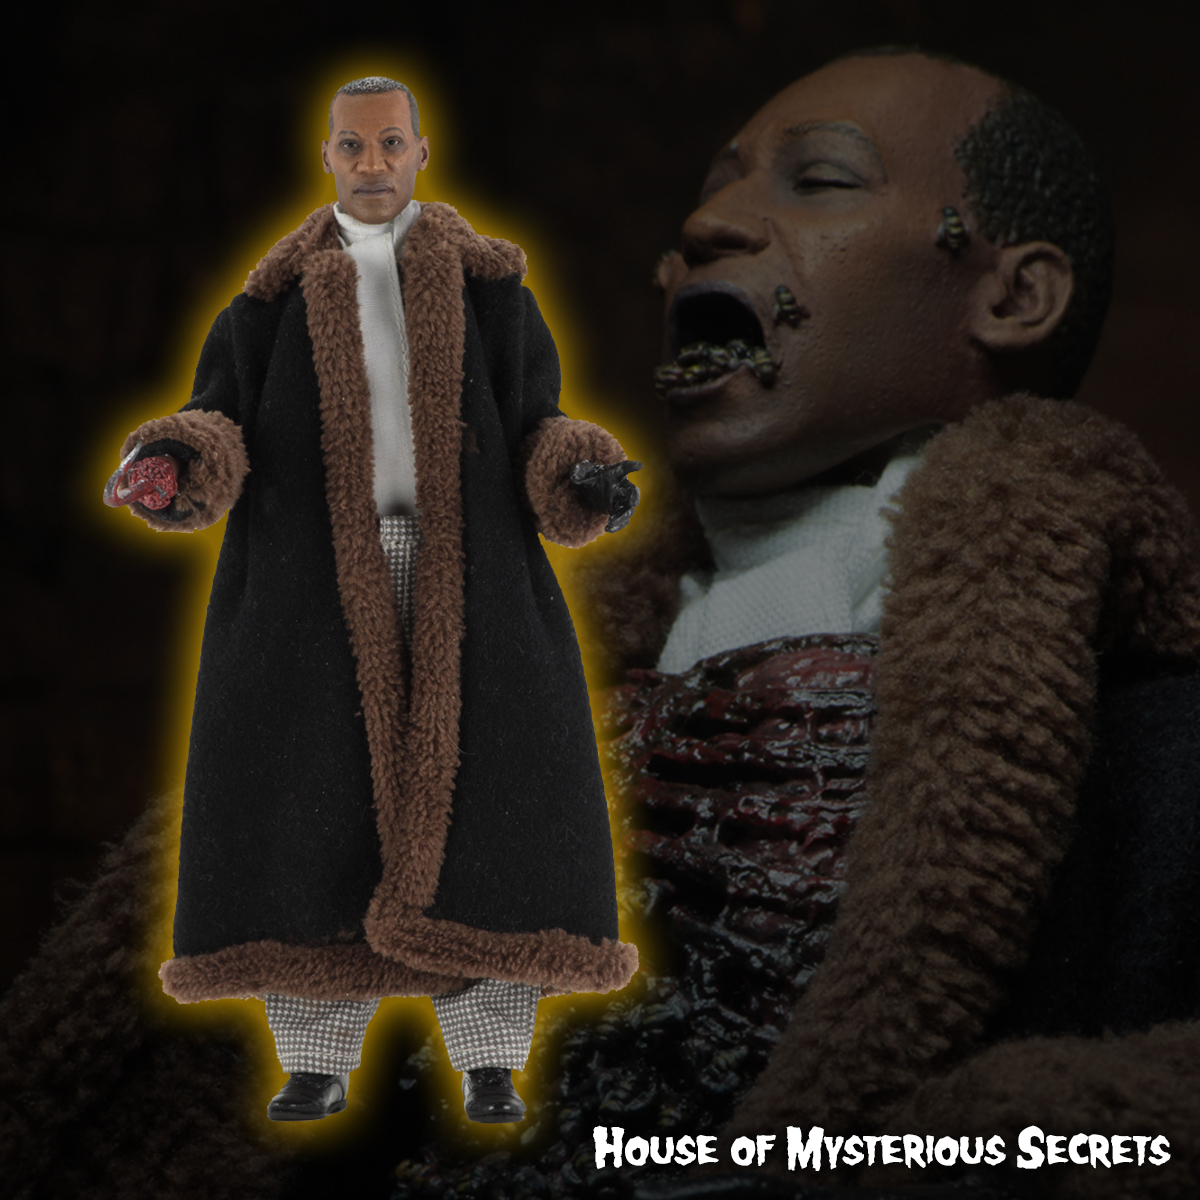 Celebrate @TonyTodd54's birthday with NECA's Candyman 8" action figure: https://t.co/SOTq7UjT1w https://t.co/IspjtAHKBF 